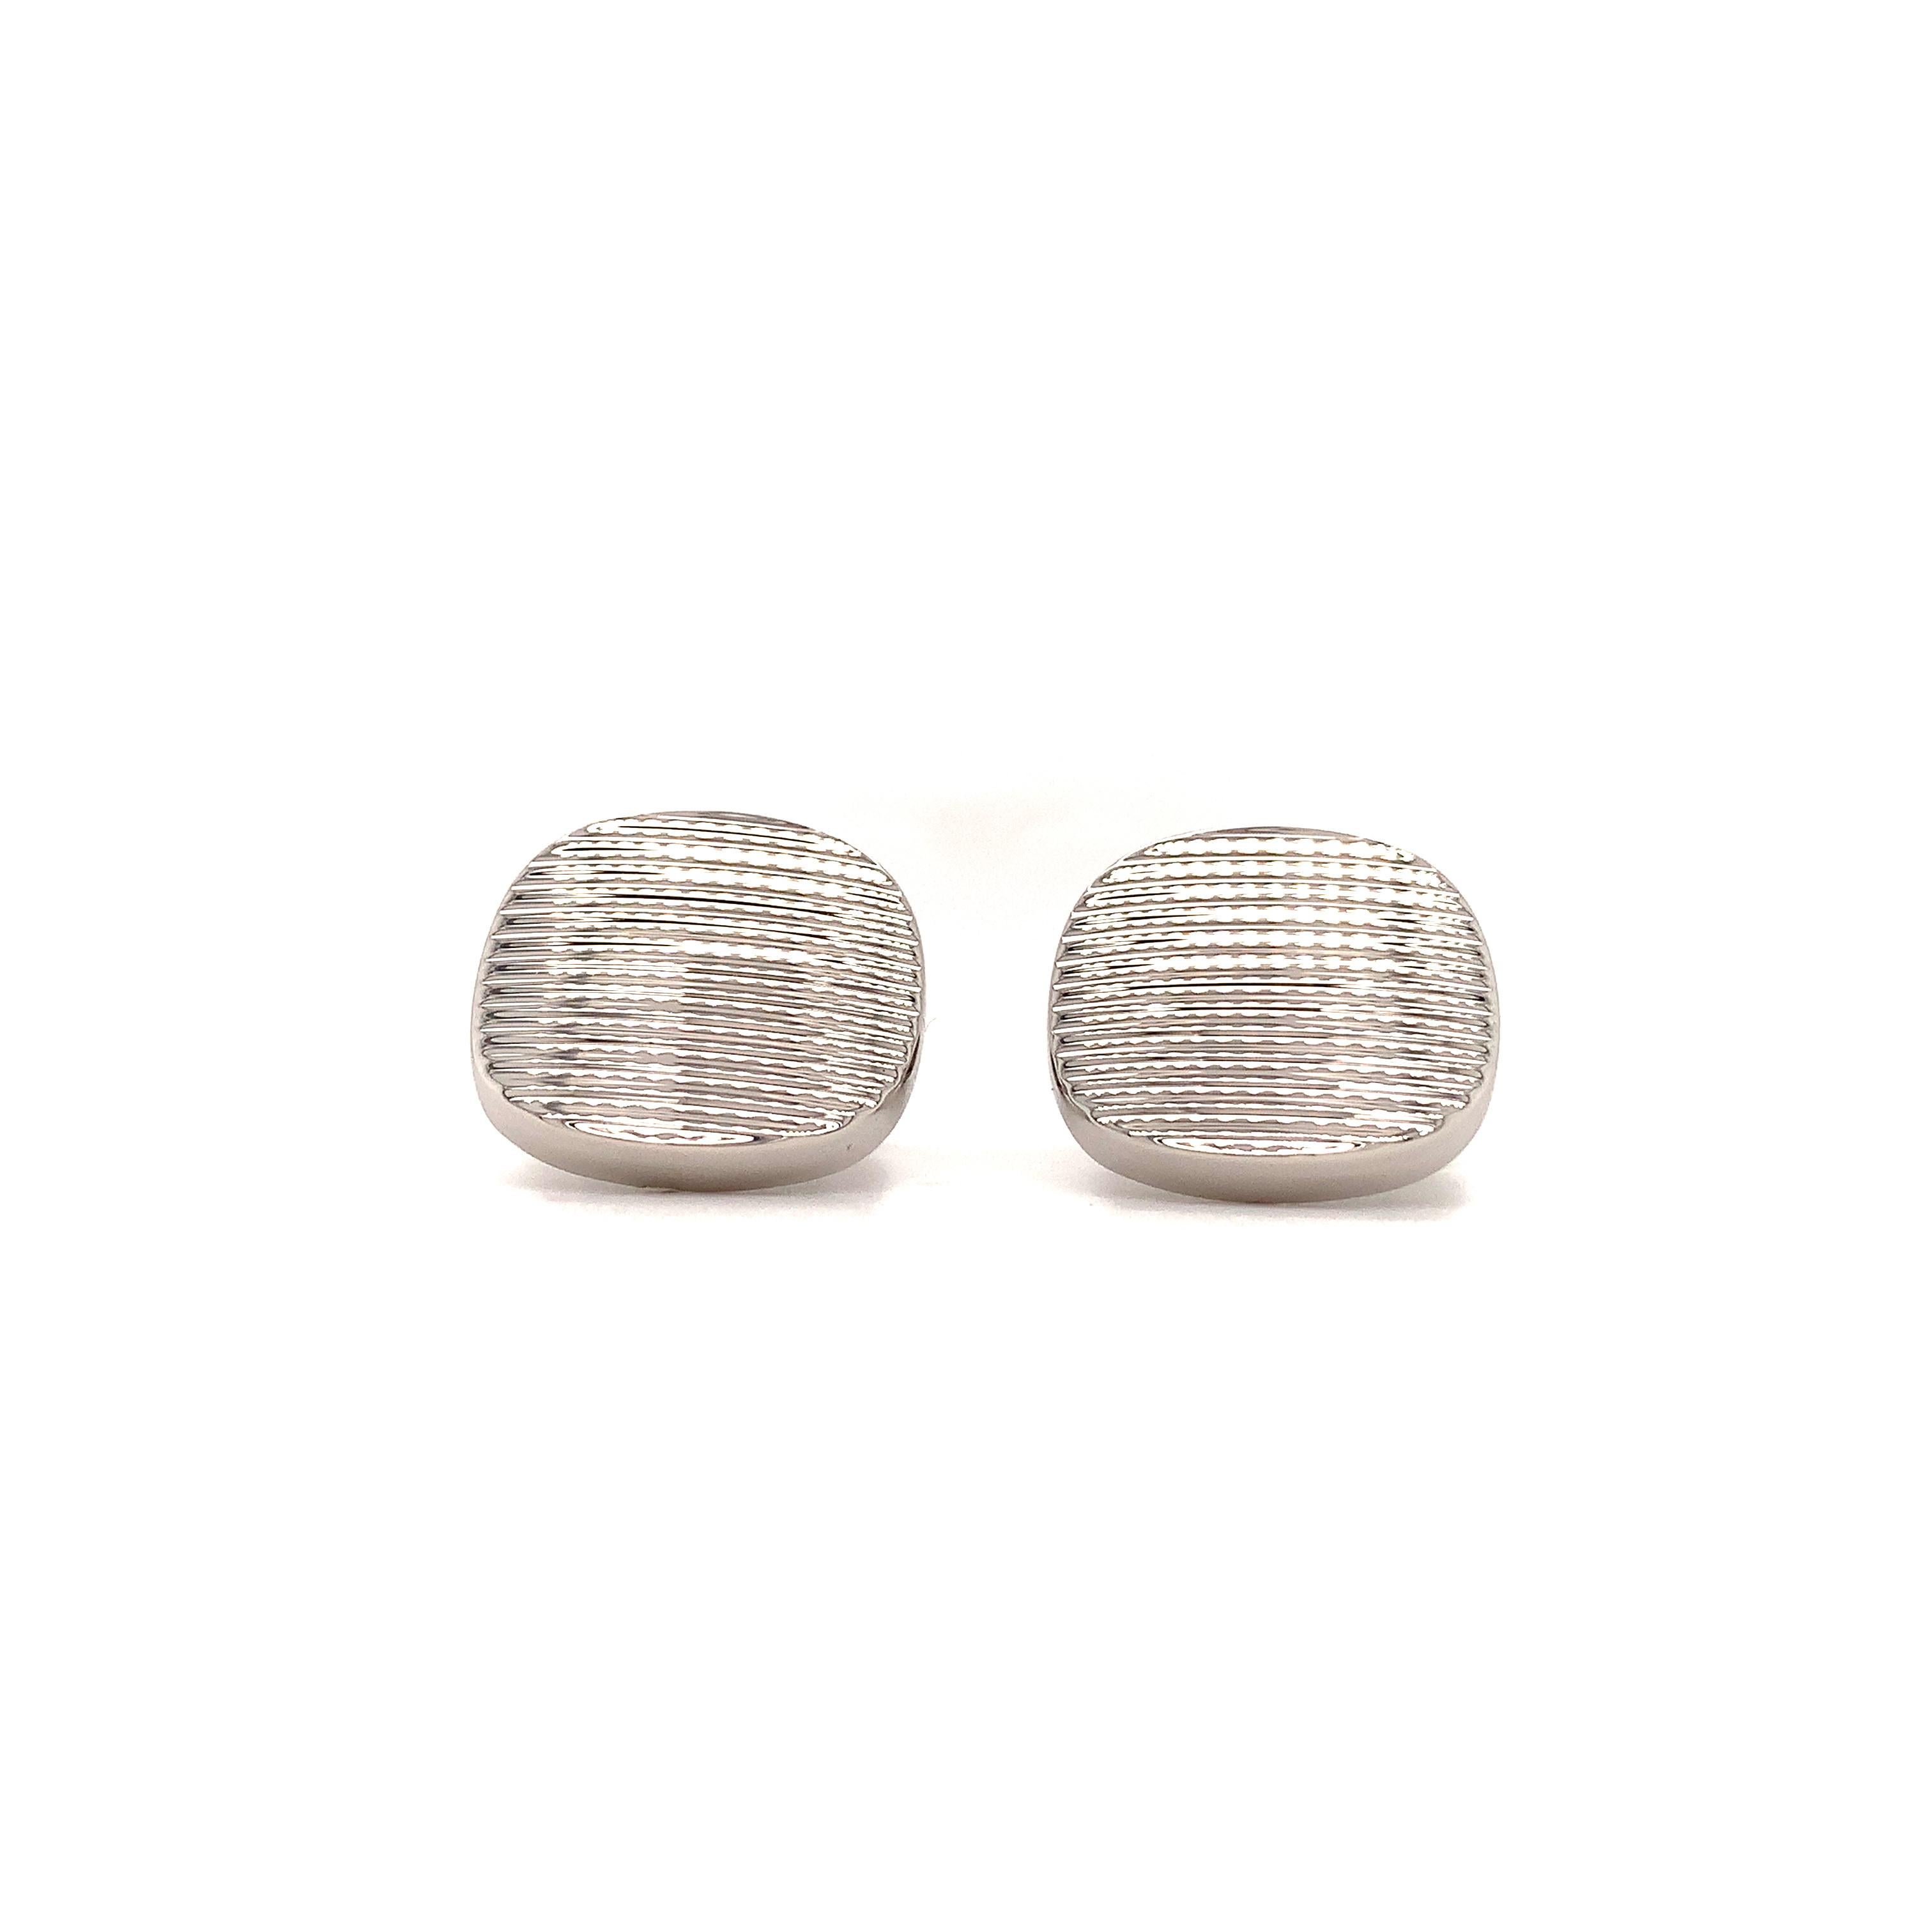 Cushion shaped Victor Mayer Structured lines Cufflinks 925 Sterling Silver, dimensions approx. 17 mm x 18 mm

VICTOR MAYER is a fine jewelry house known for its sophisticated craftsmanship. Since 1989, the company has been closely associated with